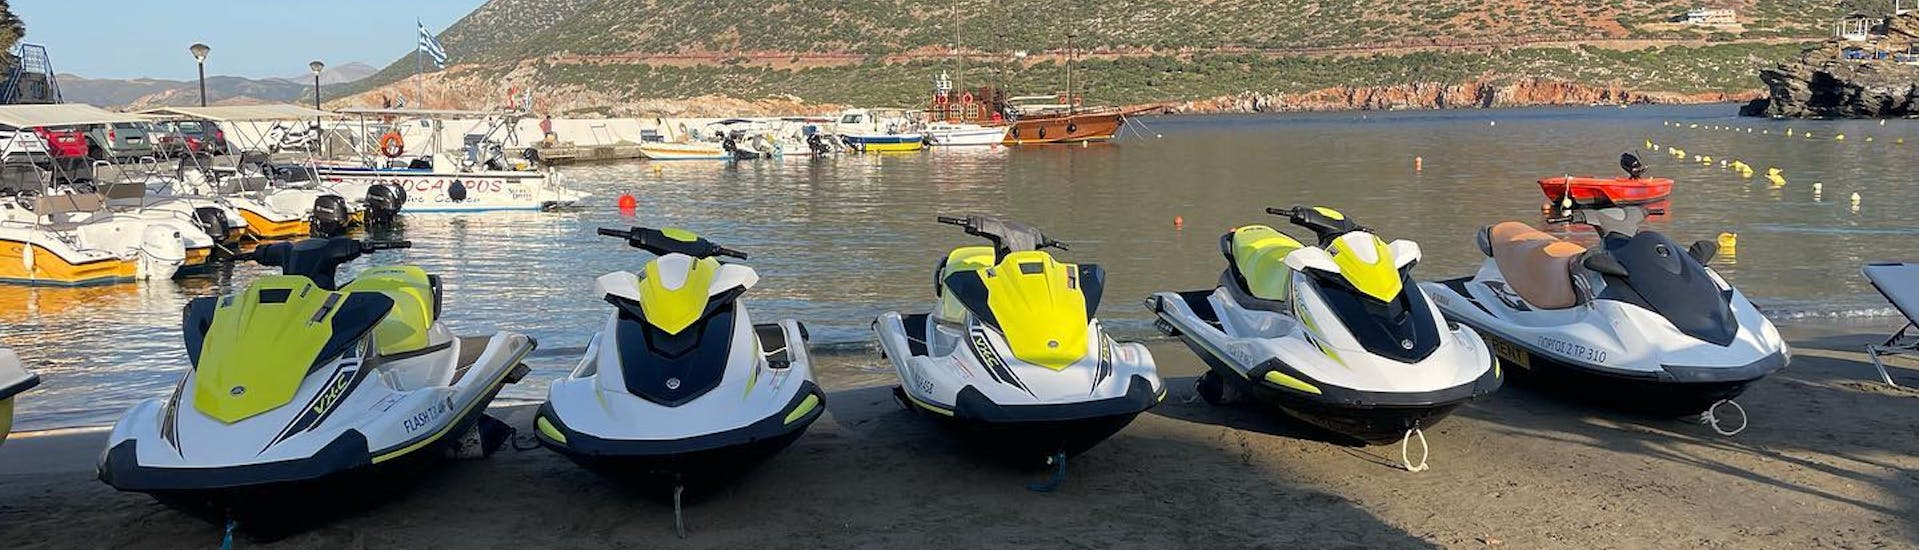 The jet skis are waiting for you on the beach to begin the Jet Ski in Bali on Crete with The Skippers Bali.